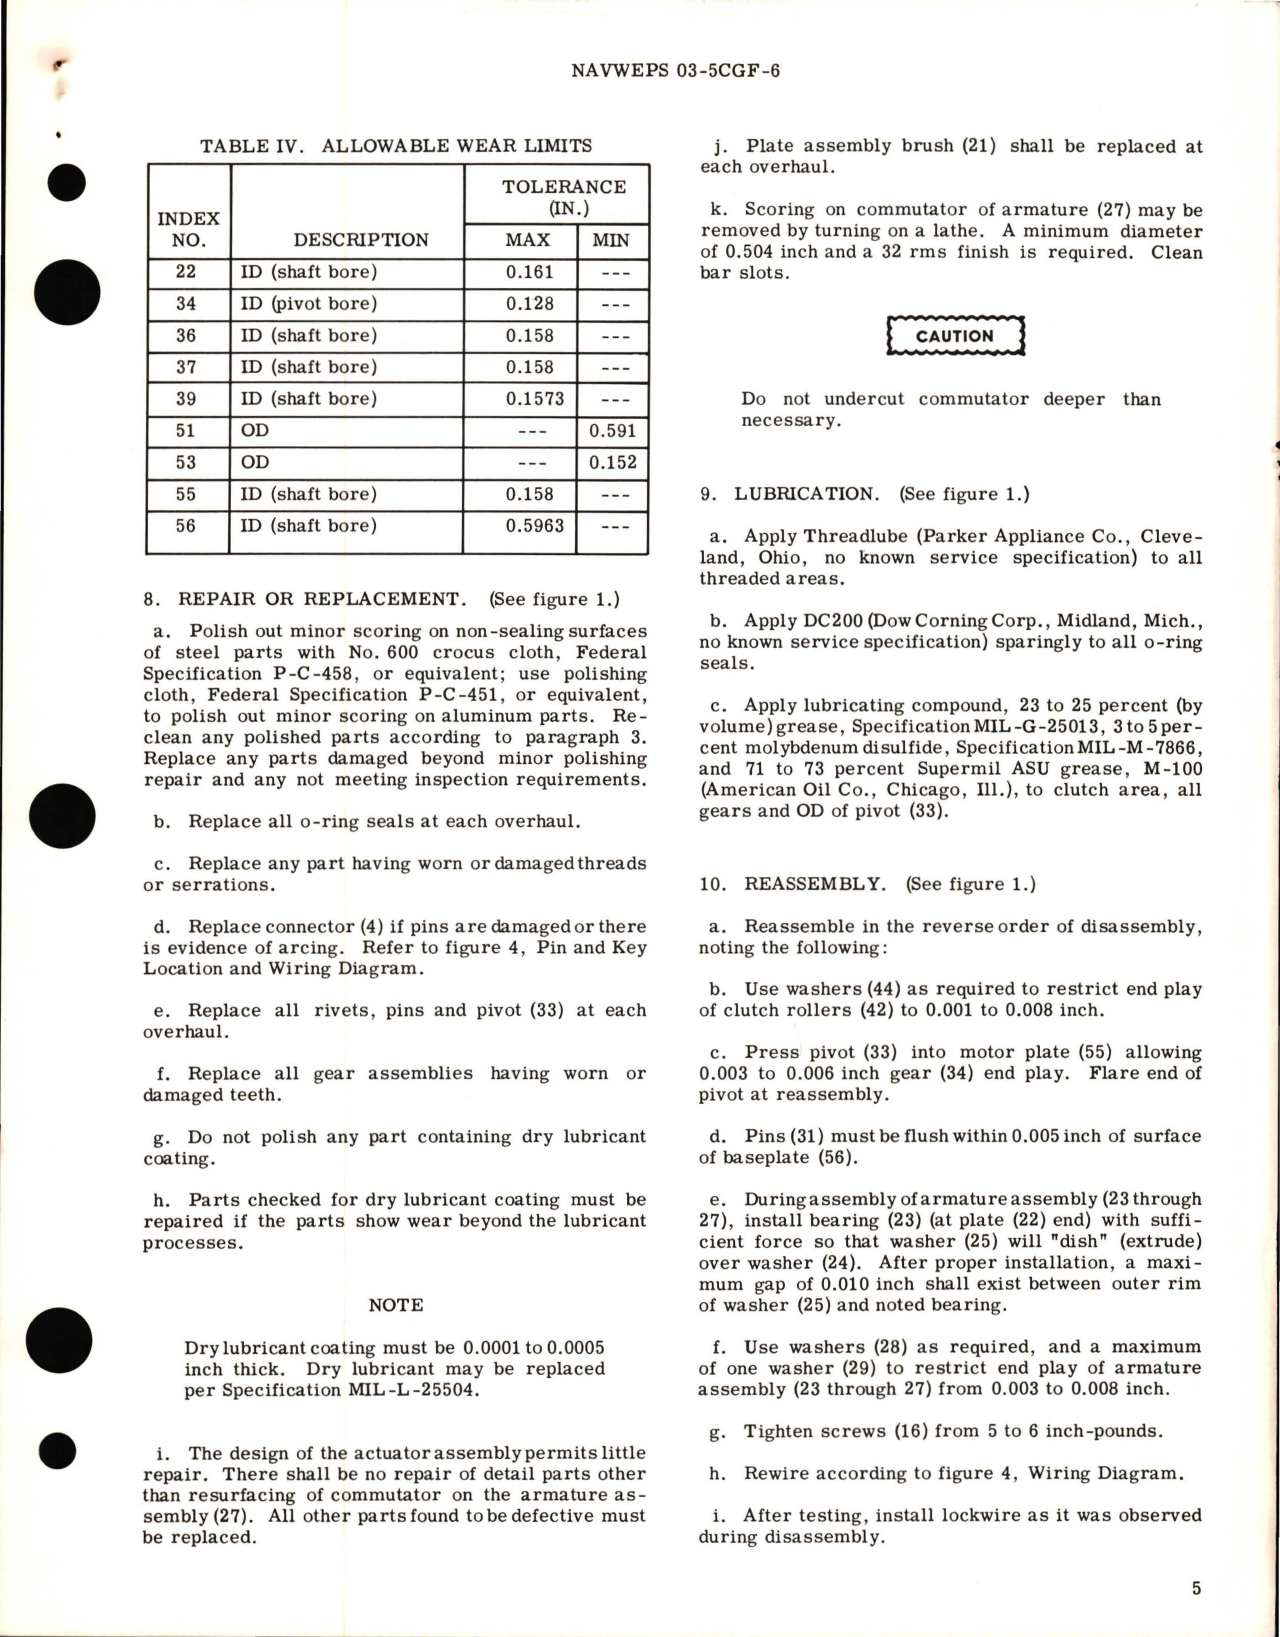 Sample page 5 from AirCorps Library document: Overhaul Instructions with Parts Breakdown for Vapor Proof Actuator Assembly - Part 152938 